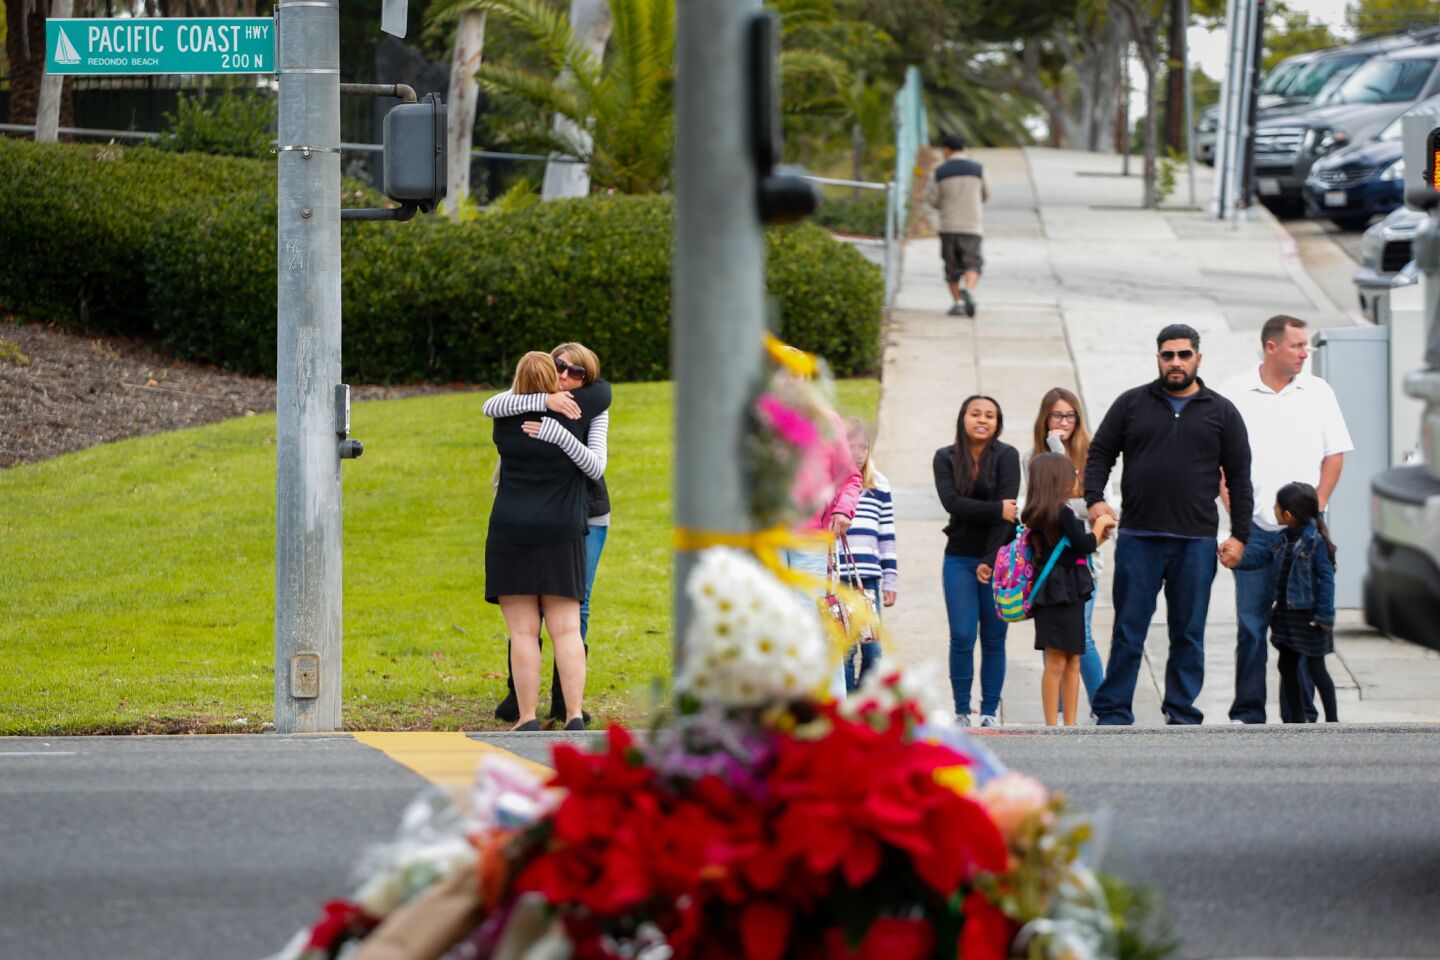 People dropped flowers and stopped at the corner of Vincent Street and Pacific Coast Highway in Redondo Beach near the site of the fatal accident.